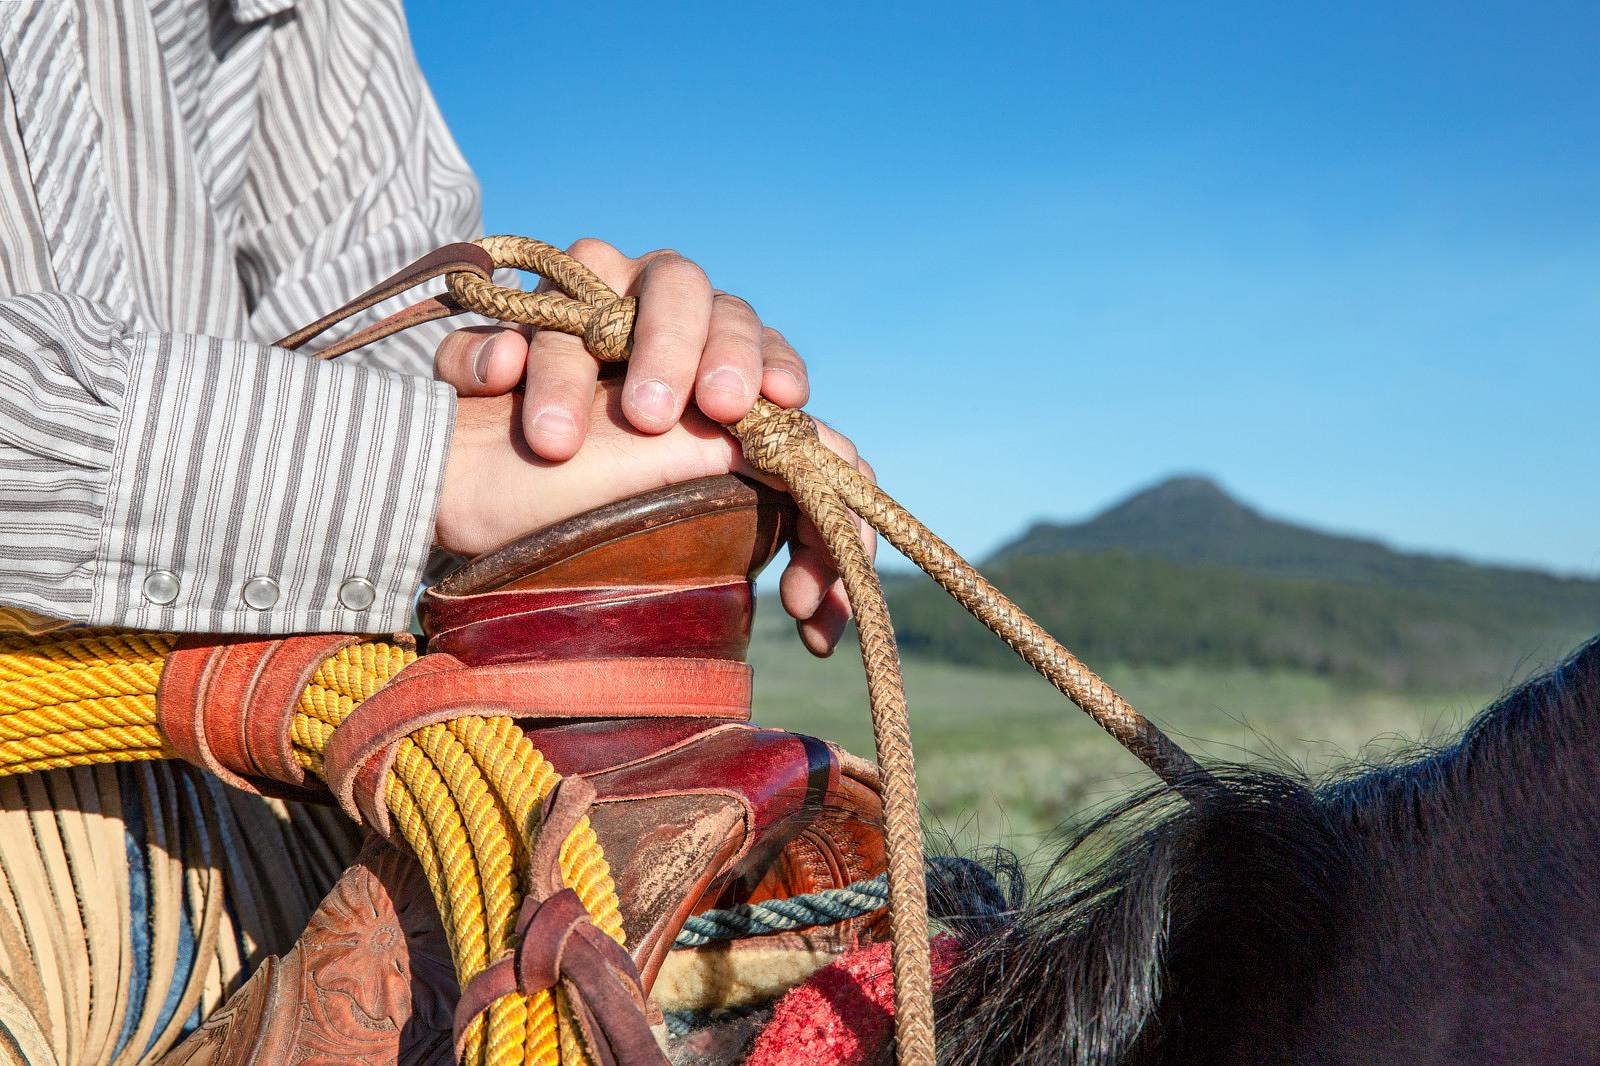 Hands on Saddle horn holding rope - Photo by Todd Klassy